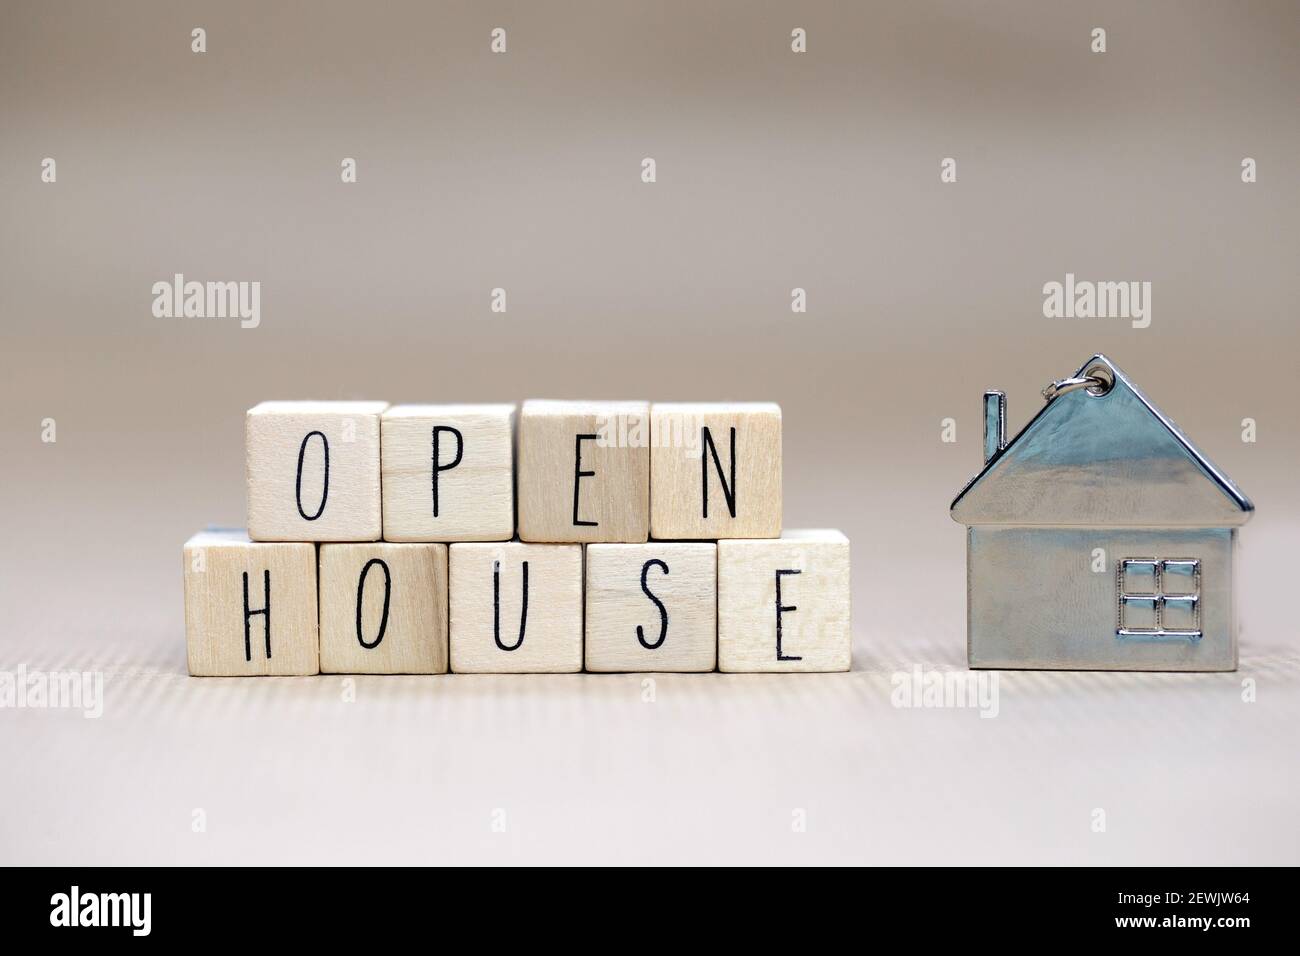 open house sign text wooden cubes, real estate, mortgage,business and sale concept background with symbol of house copy space. Stock Photo